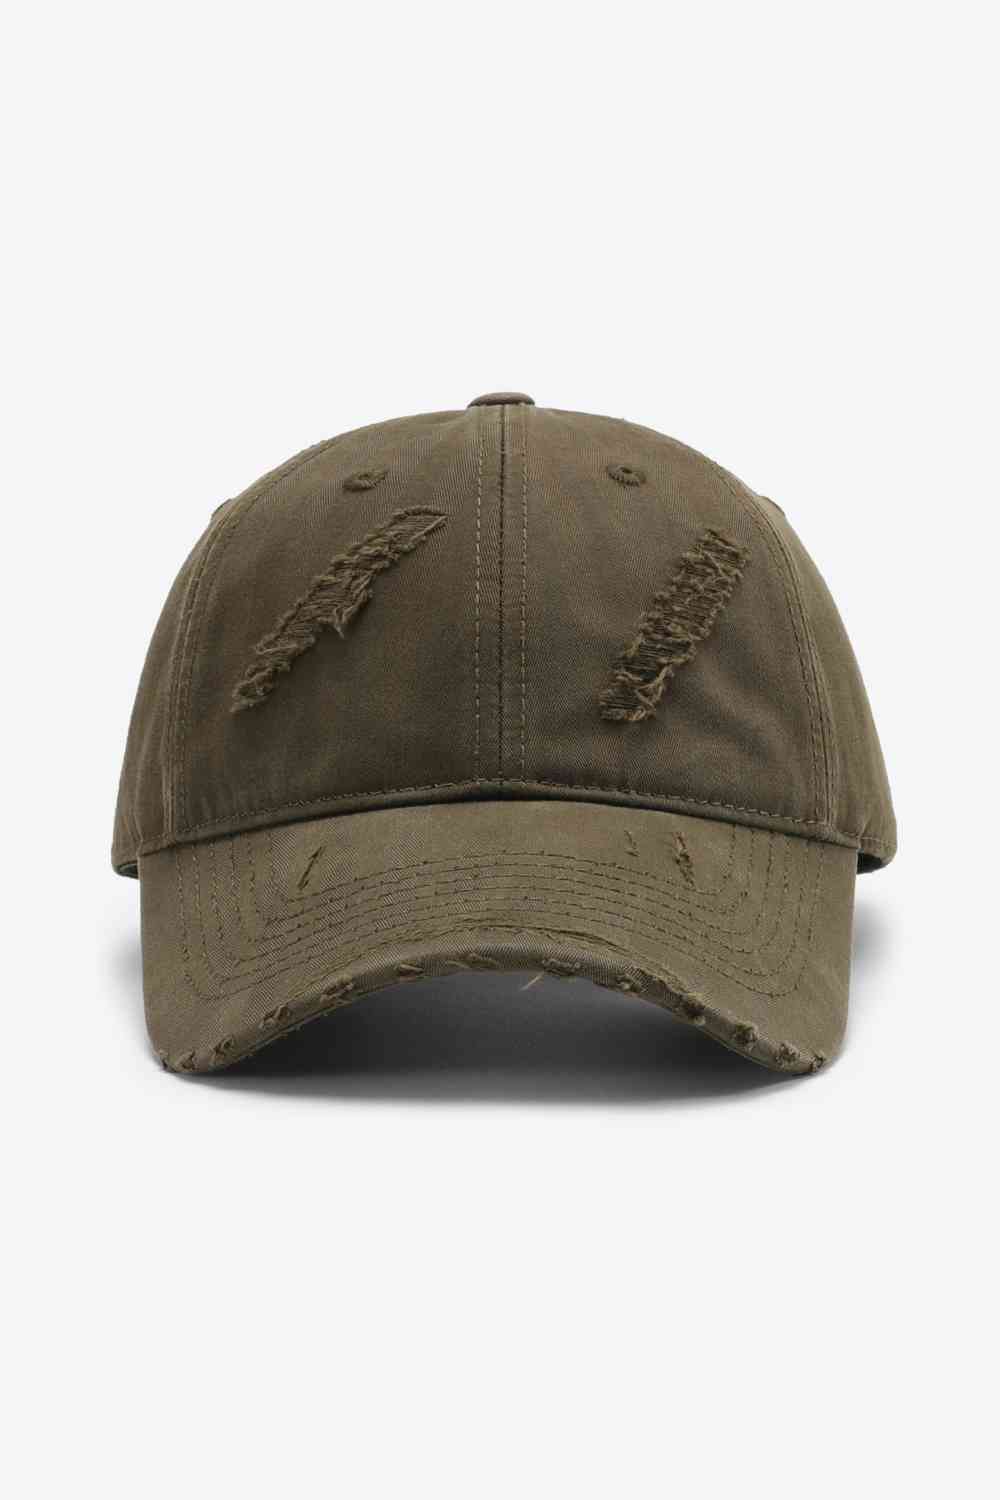 Distressed Adjustable Baseball Cap  Southern Soul Collectives